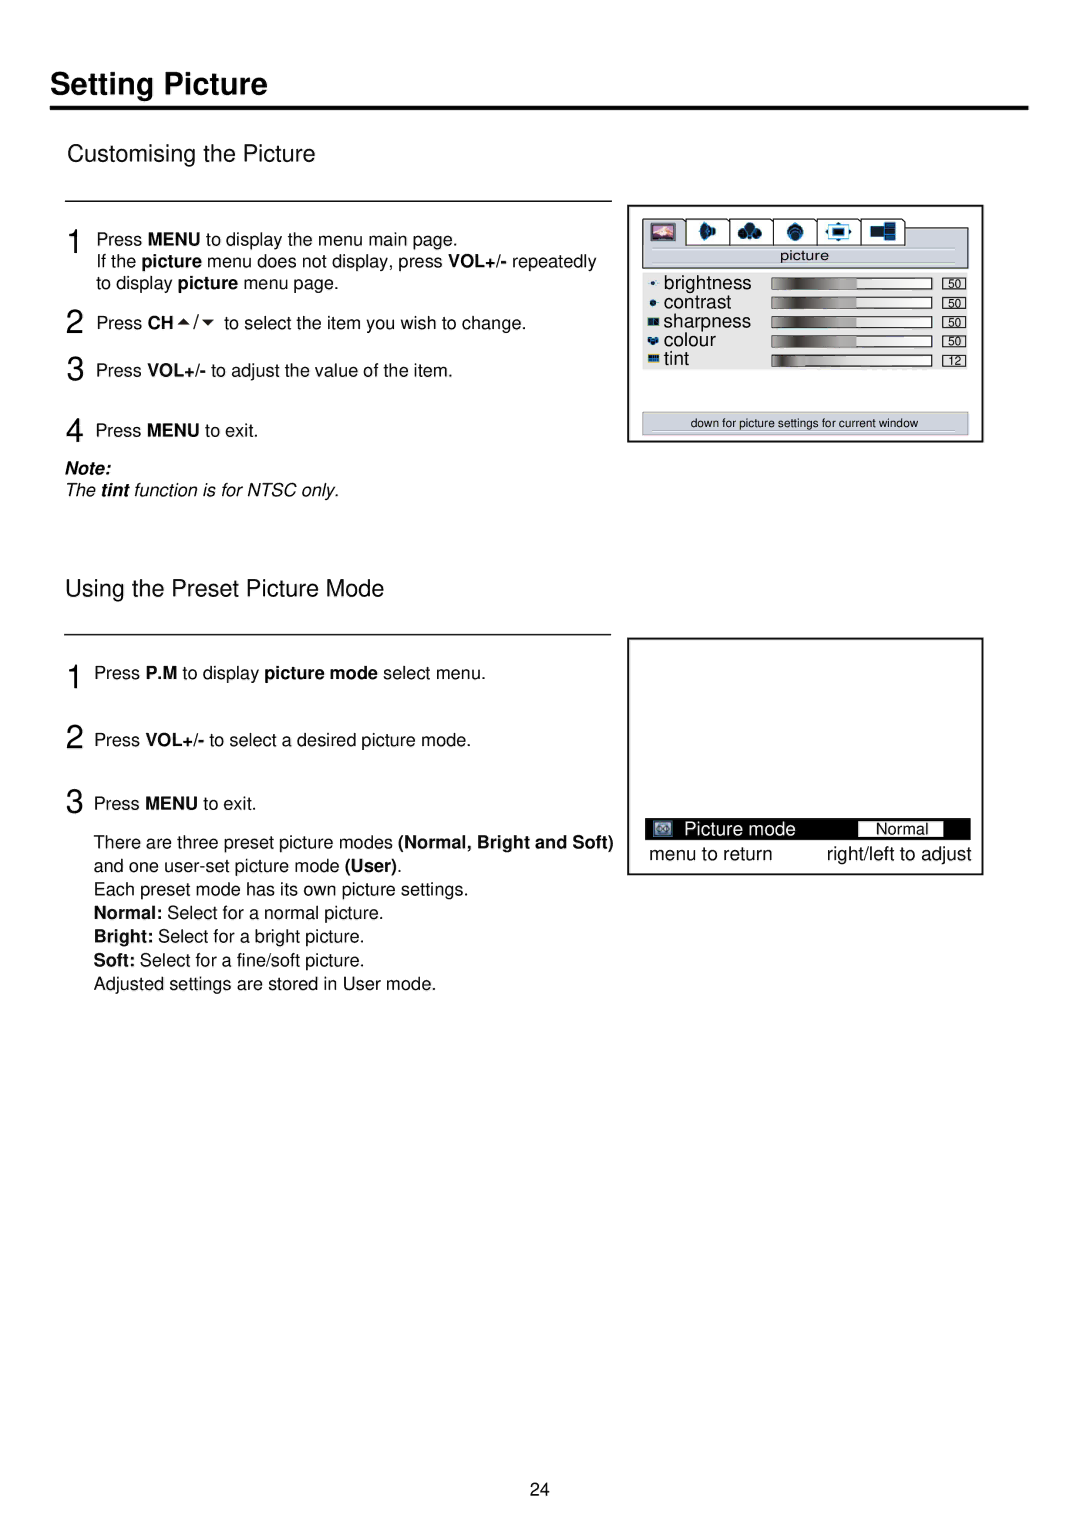 Palsonic PDP4250 Setting Picture, Customising the Picture, Using the Preset Picture Mode, Picture mode, Menu to return 